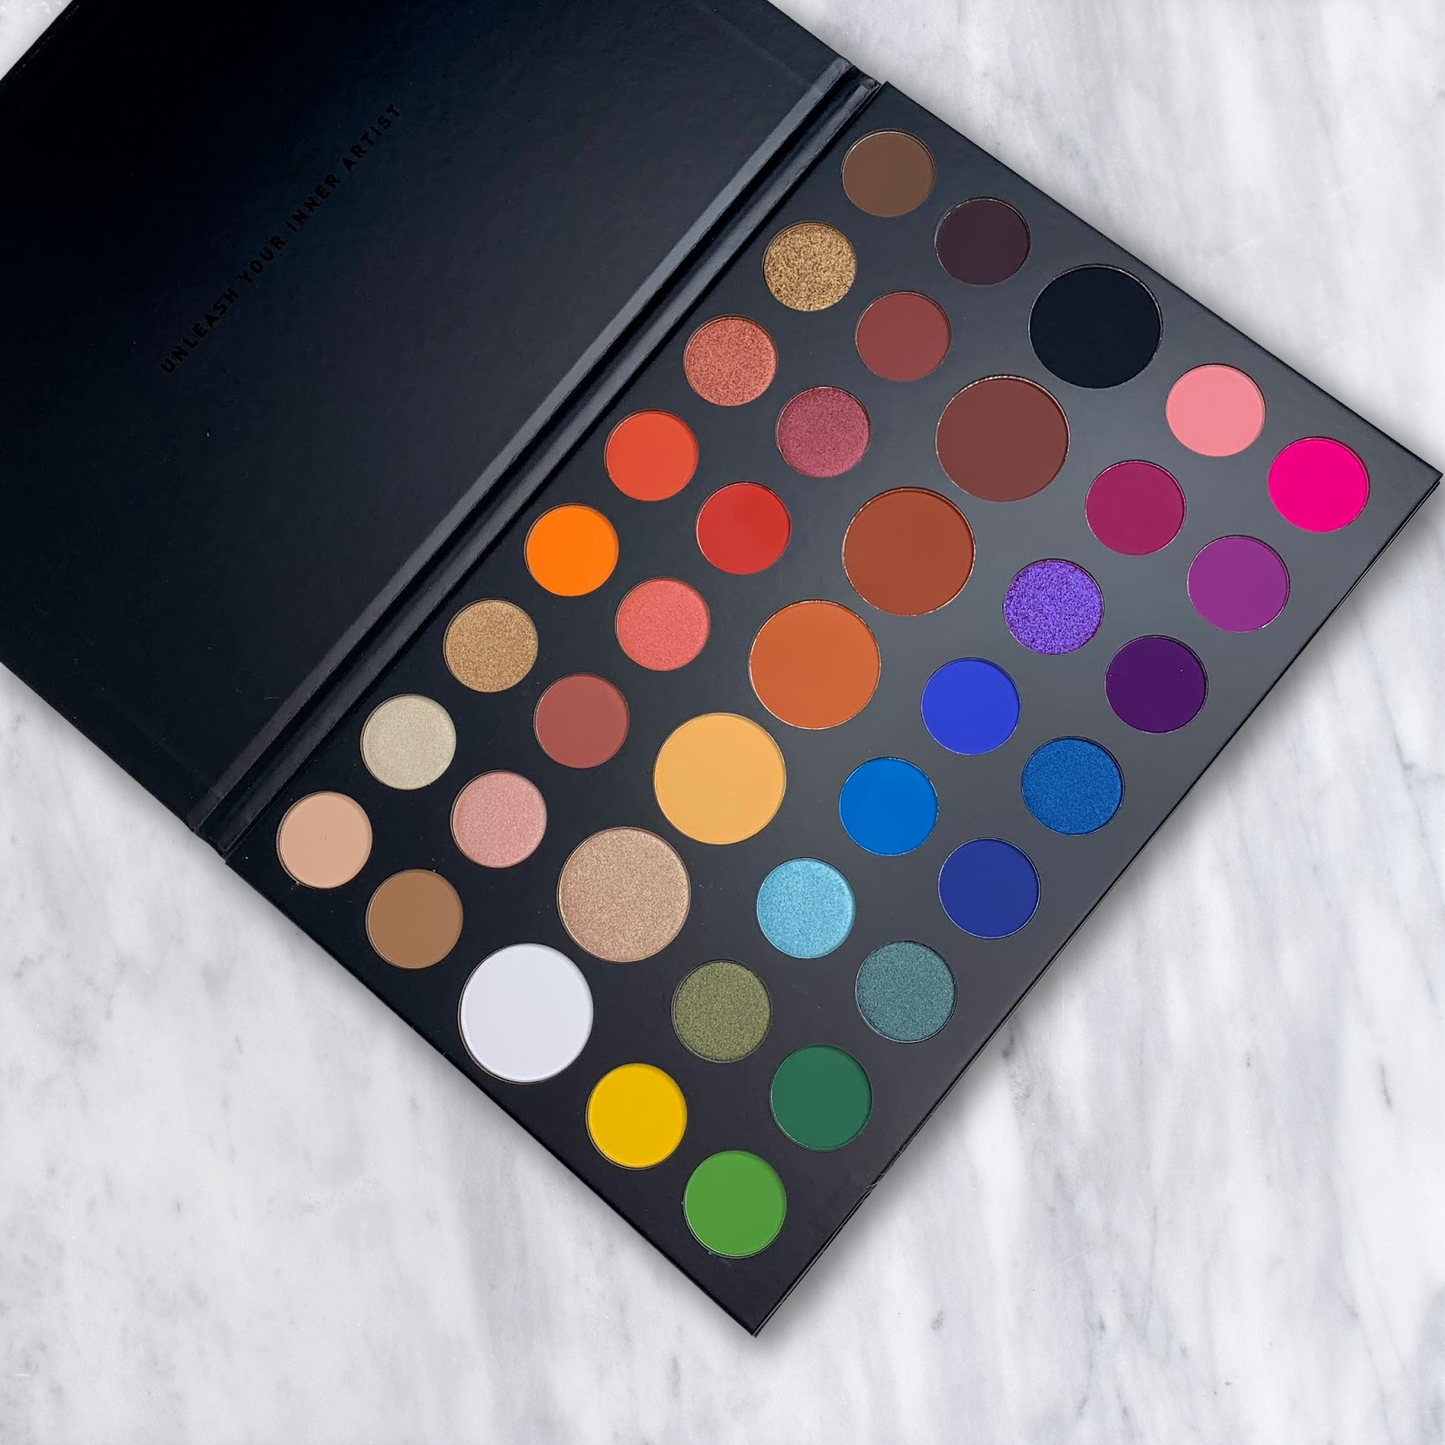 Morphe x James Charles: 39 - Vibrant Shade Artistry Palette for Makeup Masterpieces